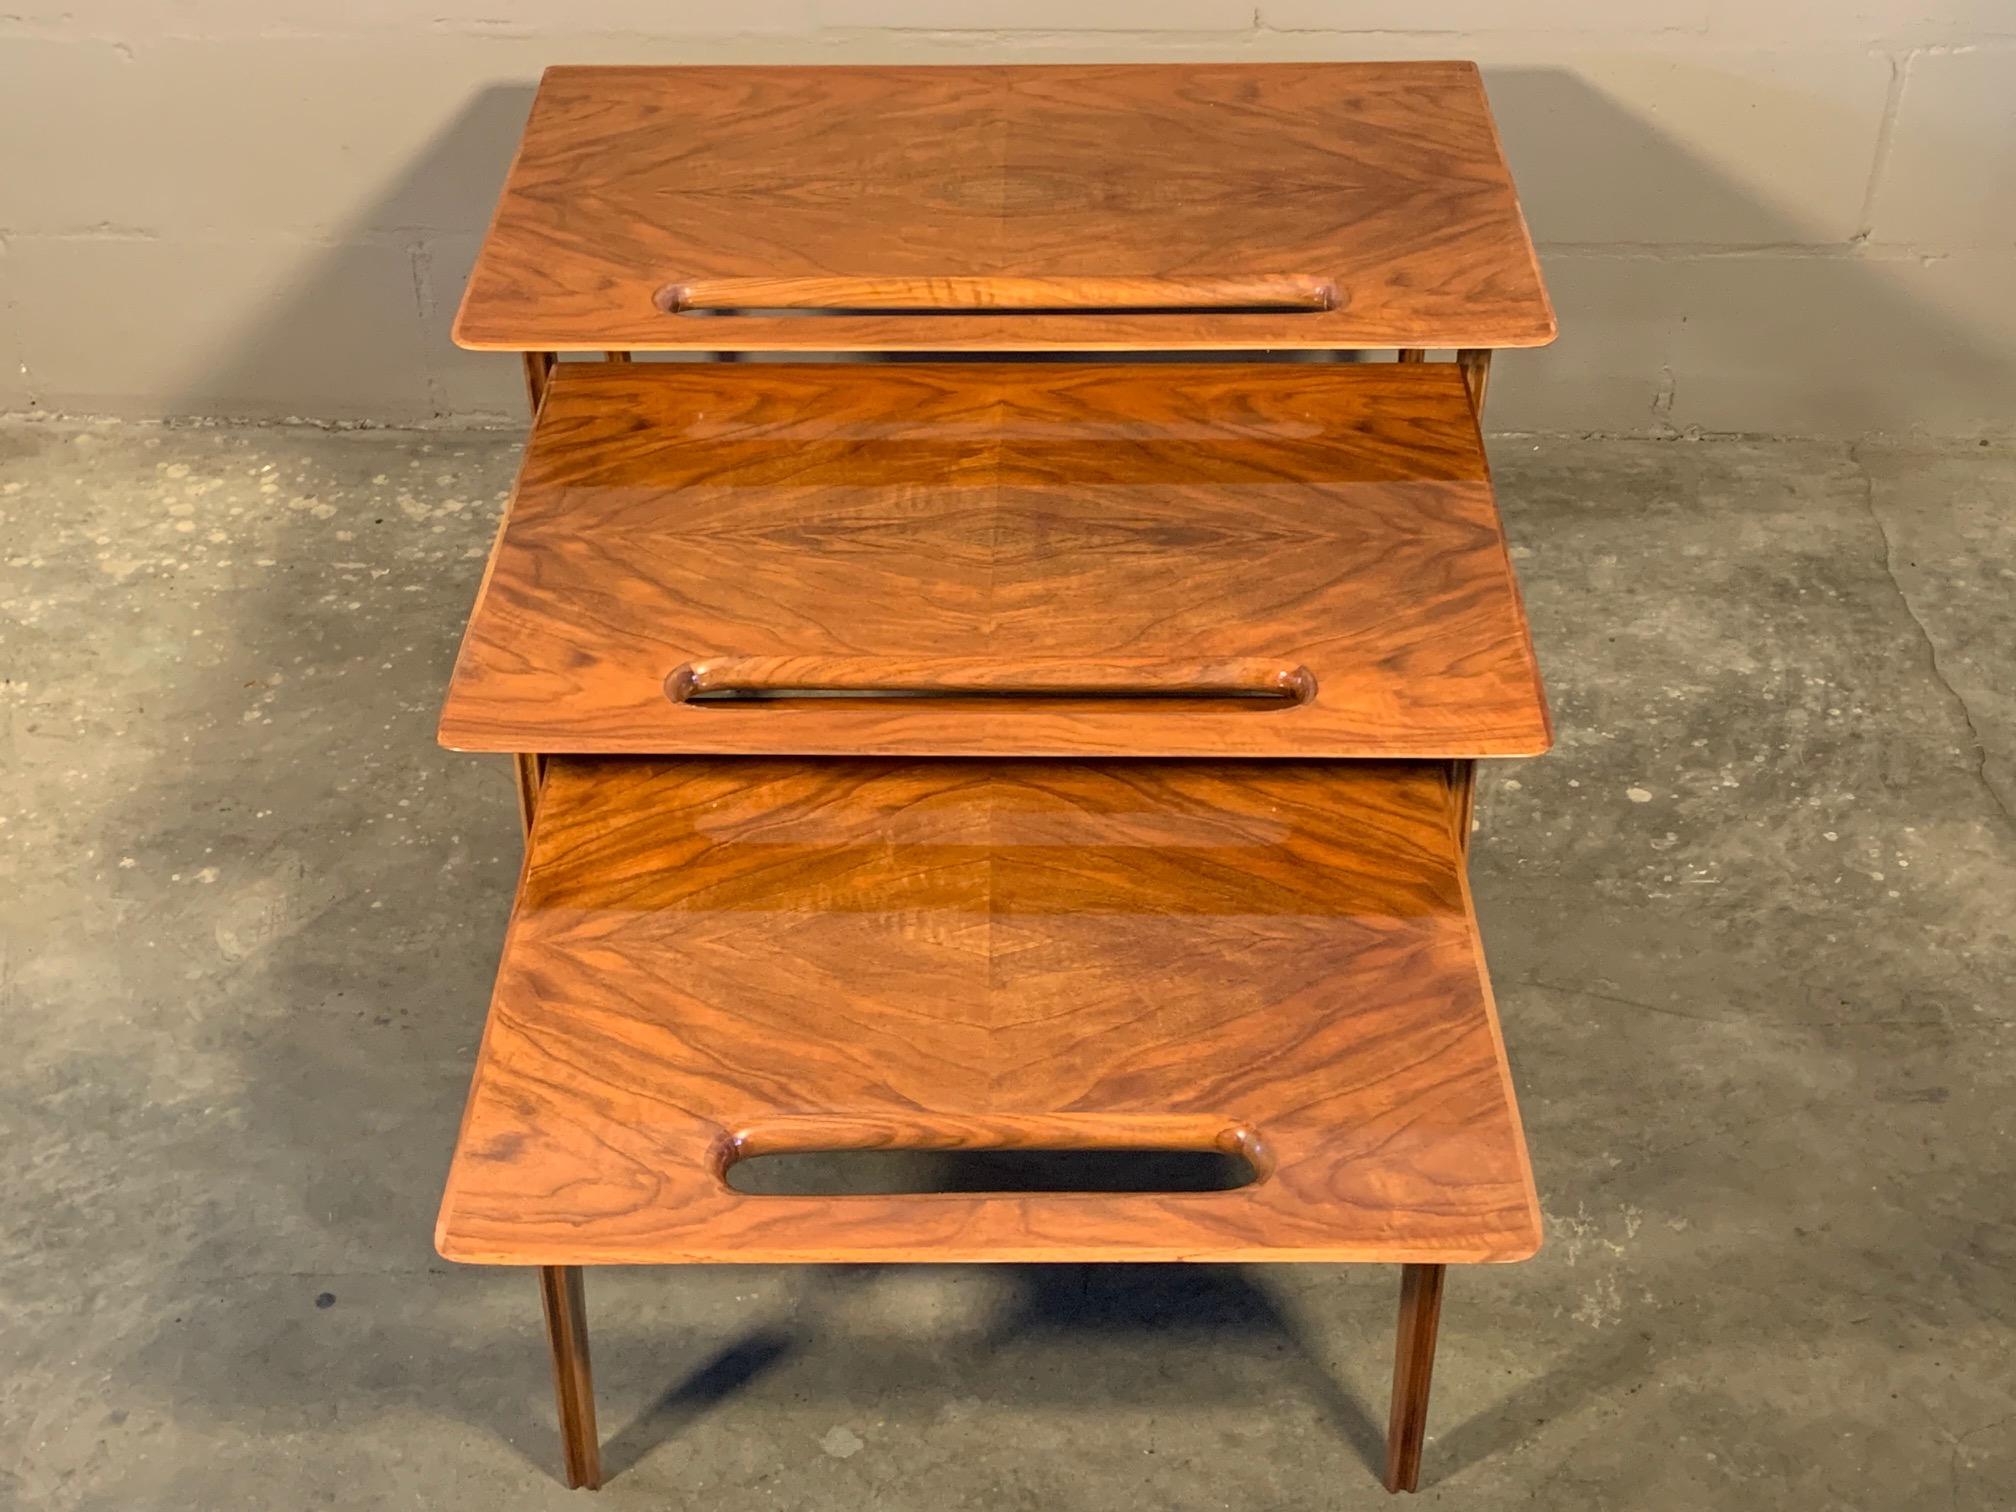 A rare set of three nesting tables with handle cutout and tapering legs. Designed by Ico Parisi and retailed by Singer & Sons. Made of Italian walnut, circa early 1950s.